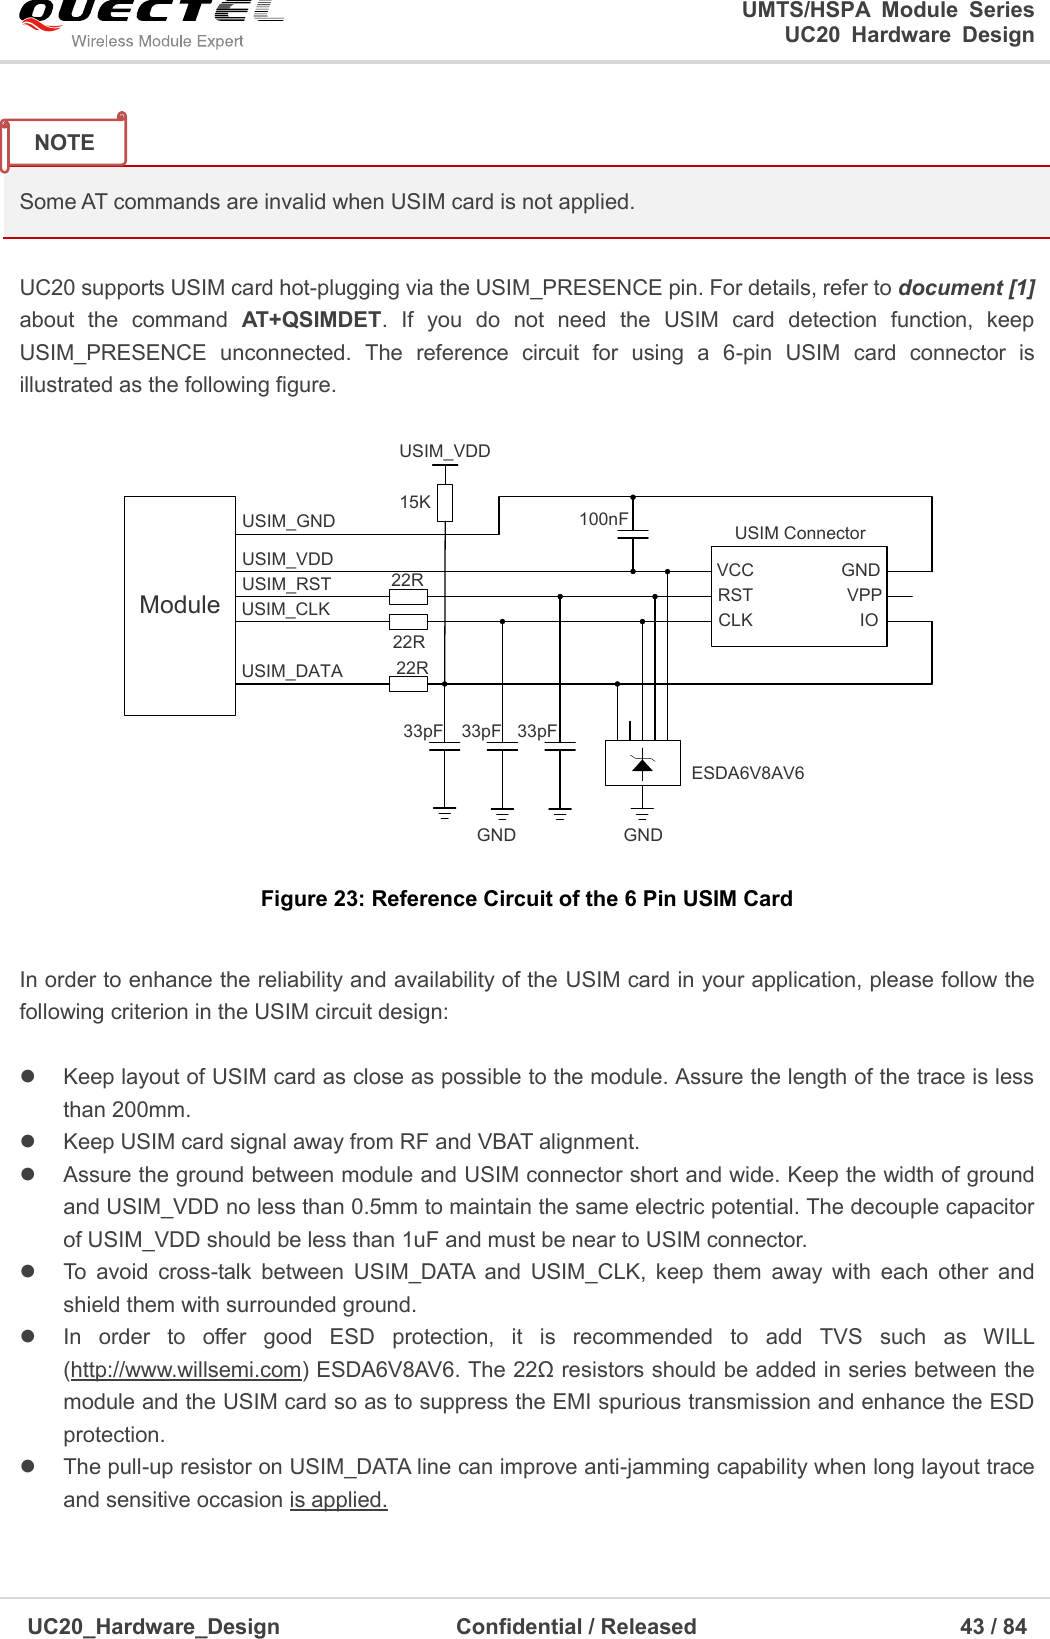                                                                                                                                               UMTS/HSPA  Module  Series                                                                 UC20  Hardware  Design  UC20_Hardware_Design                  Confidential / Released                            43 / 84      Some AT commands are invalid when USIM card is not applied.  UC20 supports USIM card hot-plugging via the USIM_PRESENCE pin. For details, refer to document [1] about  the  command  AT+QSIMDET.  If  you  do  not  need  the  USIM  card  detection  function,  keep USIM_PRESENCE  unconnected.  The  reference  circuit  for  using  a  6-pin  USIM  card  connector  is illustrated as the following figure. ModuleUSIM_VDDUSIM_GNDUSIM_RSTUSIM_CLKUSIM_DATA 22R22R22R100nF USIM ConnectorGNDESDA6V8AV633pF 33pF 33pFVCCRSTCLK IOVPPGNDGND15KUSIM_VDD Figure 23: Reference Circuit of the 6 Pin USIM Card  In order to enhance the reliability and availability of the USIM card in your application, please follow the following criterion in the USIM circuit design:    Keep layout of USIM card as close as possible to the module. Assure the length of the trace is less than 200mm.     Keep USIM card signal away from RF and VBAT alignment.   Assure the ground between module and USIM connector short and wide. Keep the width of ground and USIM_VDD no less than 0.5mm to maintain the same electric potential. The decouple capacitor of USIM_VDD should be less than 1uF and must be near to USIM connector.   To  avoid  cross-talk  between  USIM_DATA  and  USIM_CLK,  keep  them  away  with  each  other  and shield them with surrounded ground.     In  order  to  offer  good  ESD  protection,  it  is  recommended  to  add  TVS  such  as  WILL (http://www.willsemi.com) ESDA6V8AV6. The 22Ω resistors should be added in series between the module and the USIM card so as to suppress the EMI spurious transmission and enhance the ESD protection.     The pull-up resistor on USIM_DATA line can improve anti-jamming capability when long layout trace and sensitive occasion is applied. NOTE 